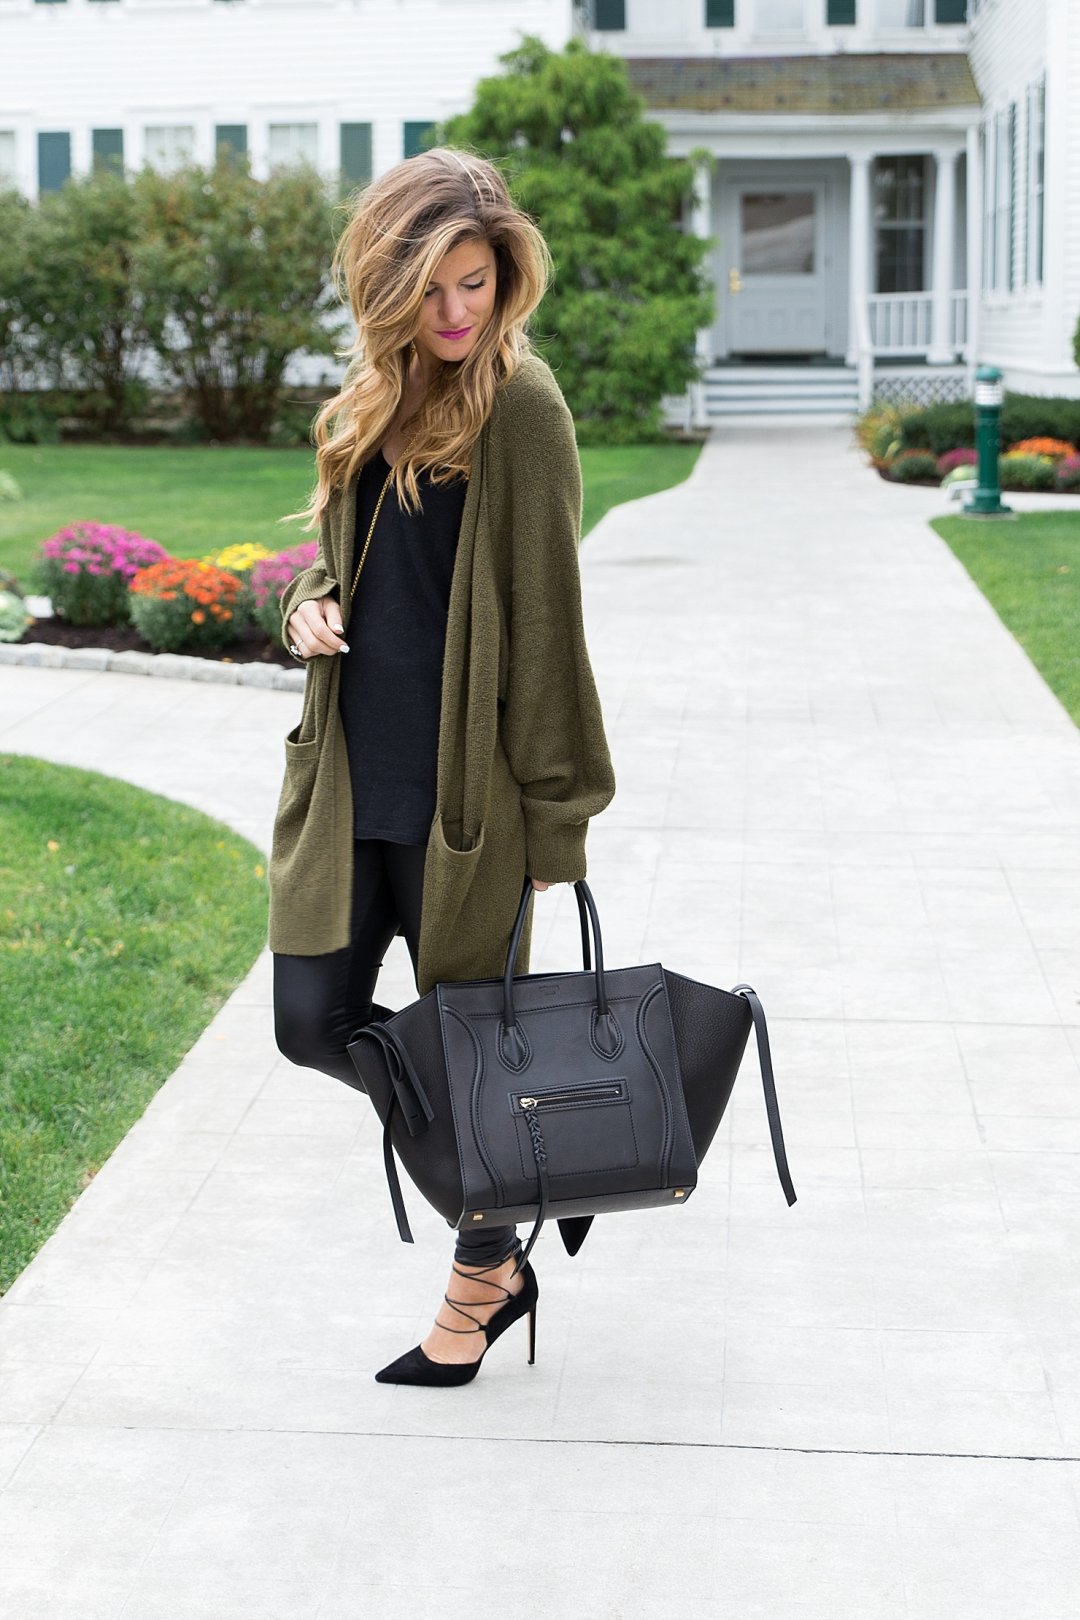 all black outfit idea, wearing all black with a long olive cardigan, liquid leather leggings winter outfit, black on black outfit, going out winter outfit, winter date night outfit, celine phantom tote, sam edelman strappy heels, winter all black outfit